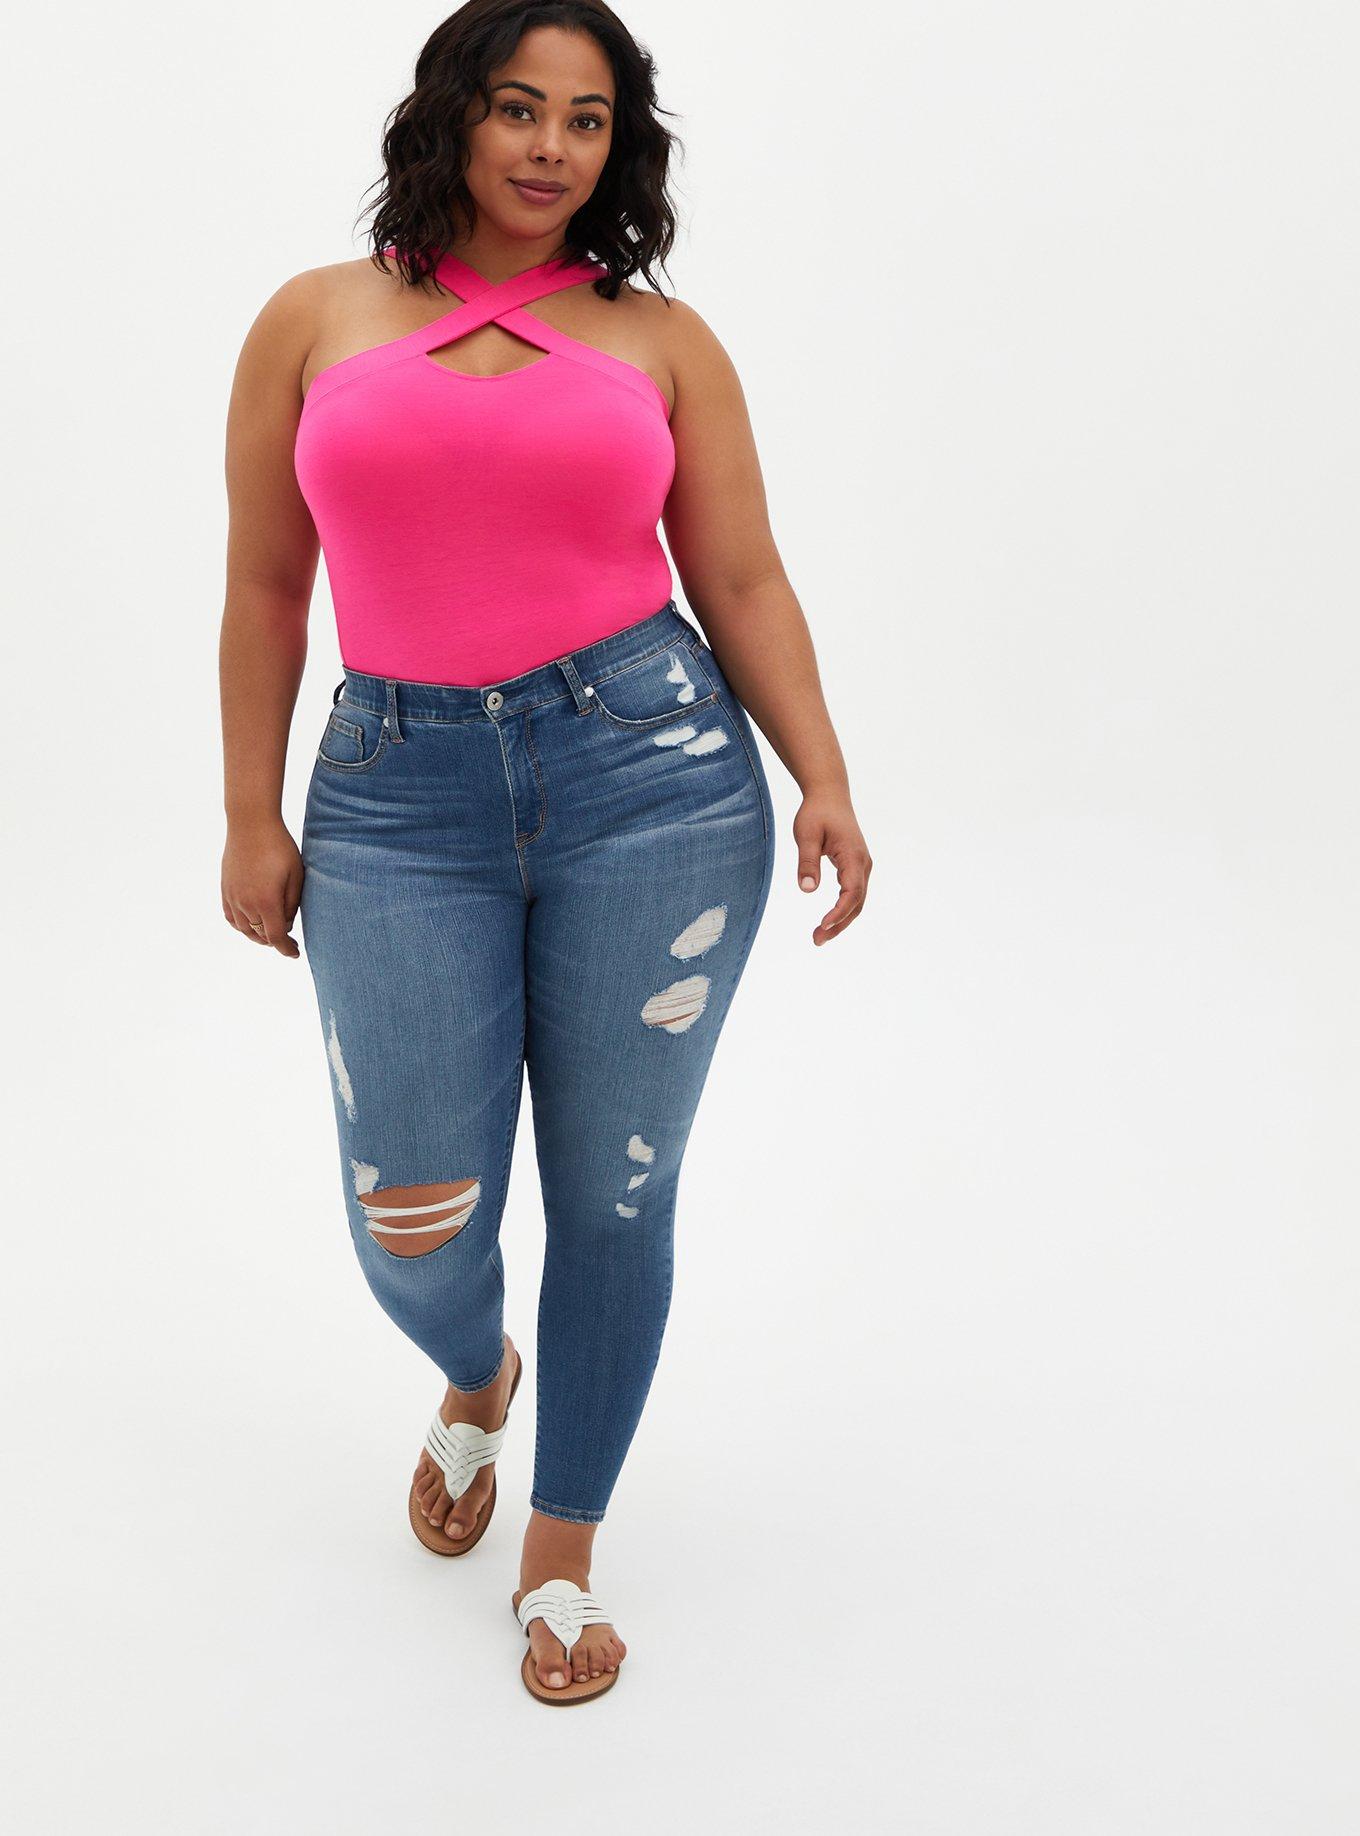 Torrid Plus Size Women's Clothing for sale in Barker Heights